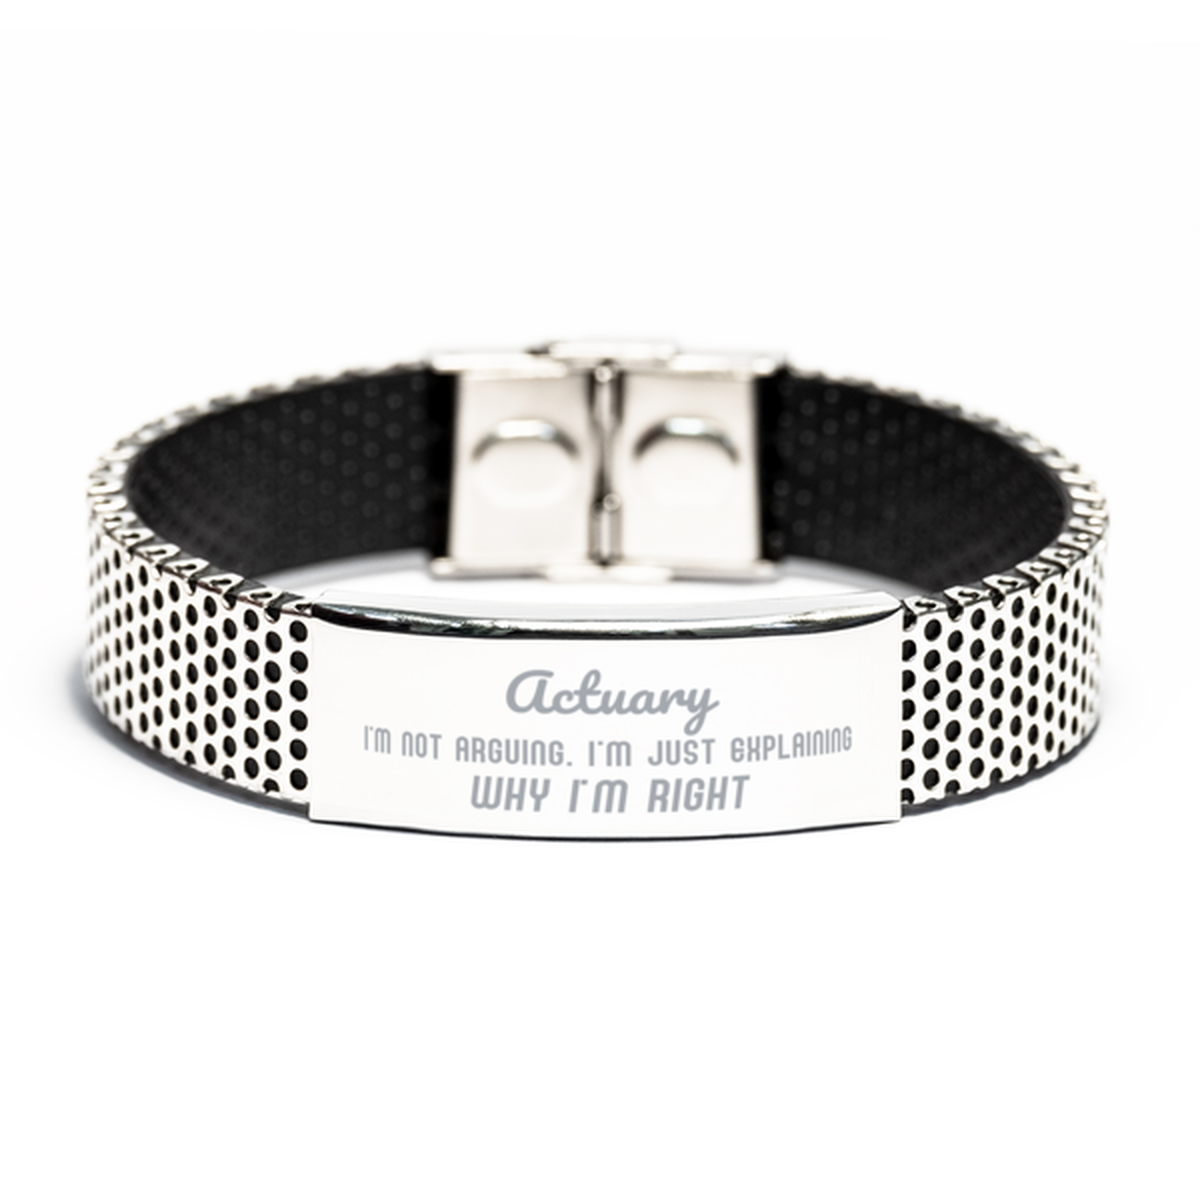 Actuary I'm not Arguing. I'm Just Explaining Why I'm RIGHT Stainless Steel Bracelet, Funny Saying Quote Actuary Gifts For Actuary Graduation Birthday Christmas Gifts for Men Women Coworker